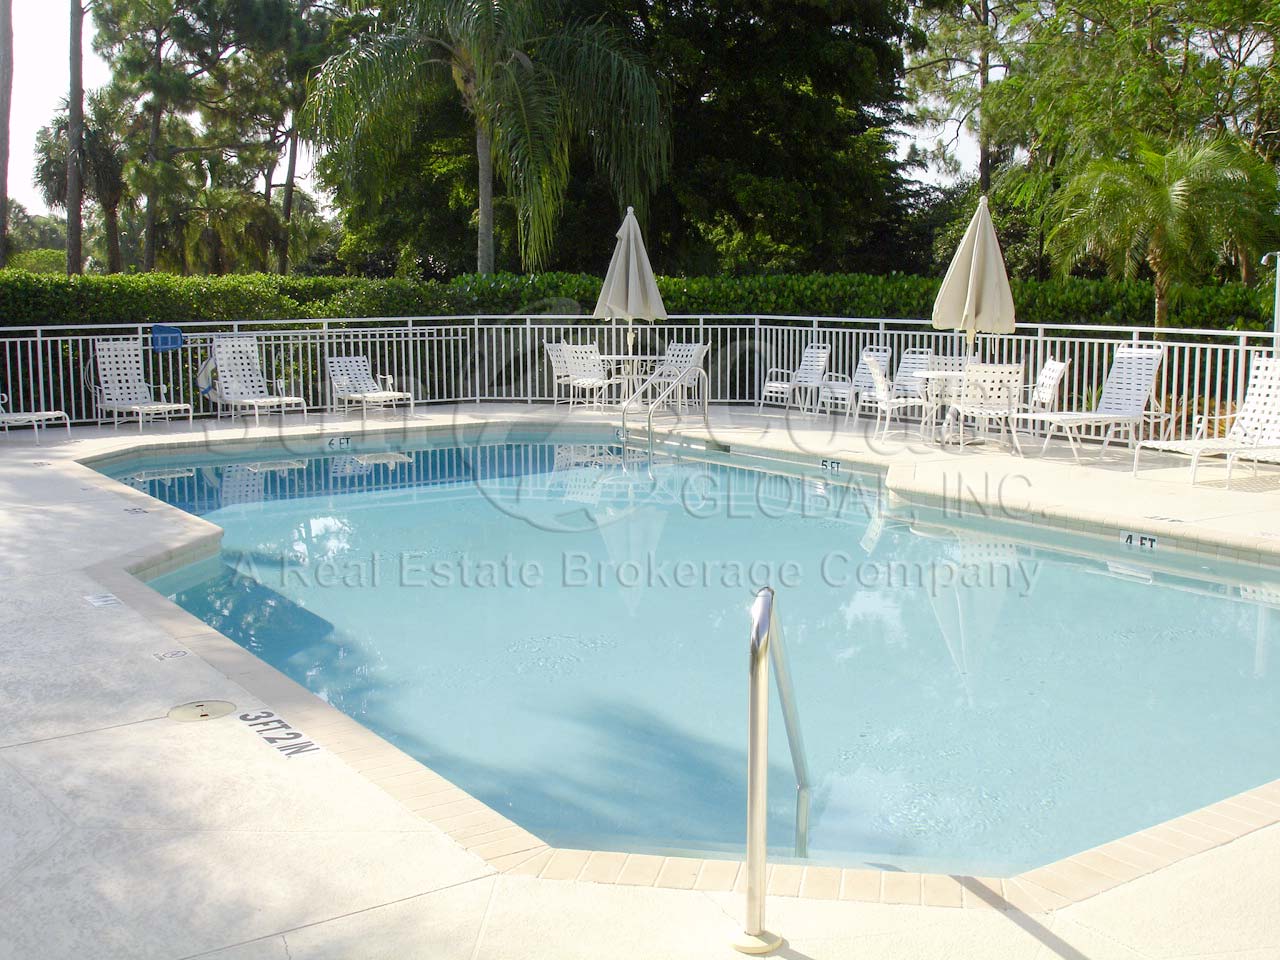 3-6 foot Community pool  with stamped pool area